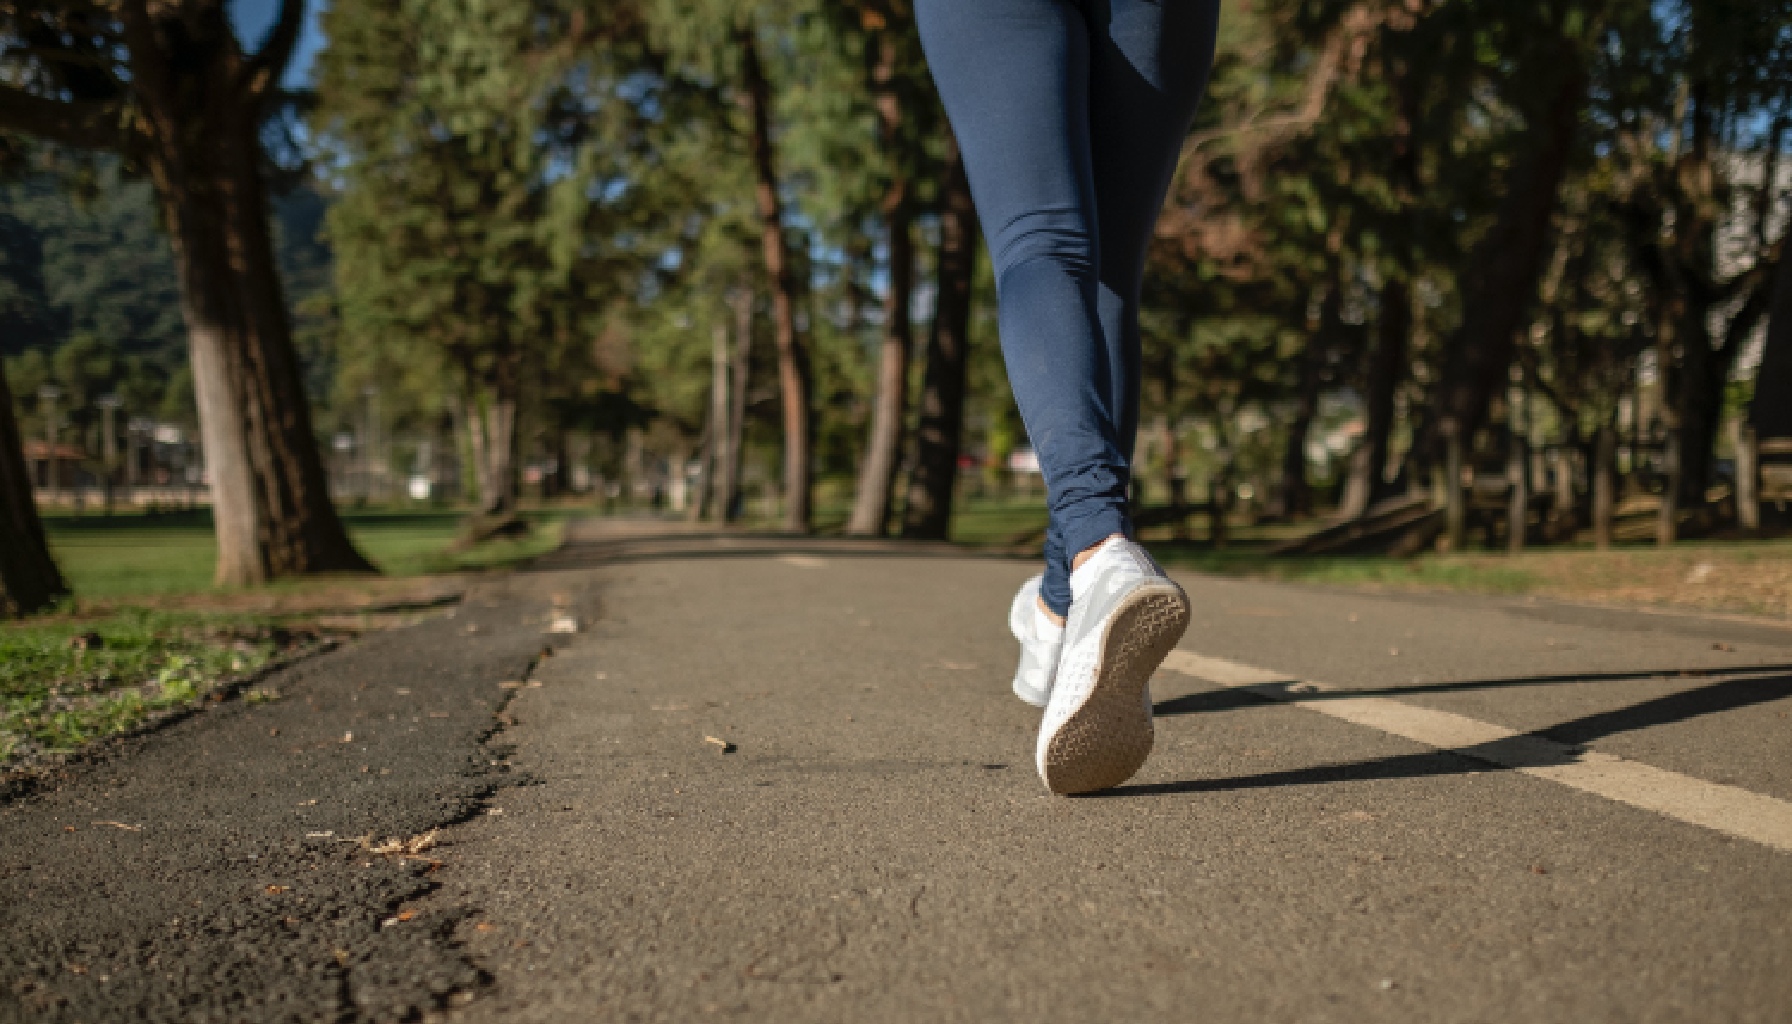 14 Benefits Of Walking 3 Miles A Day: Expert Insights & Results